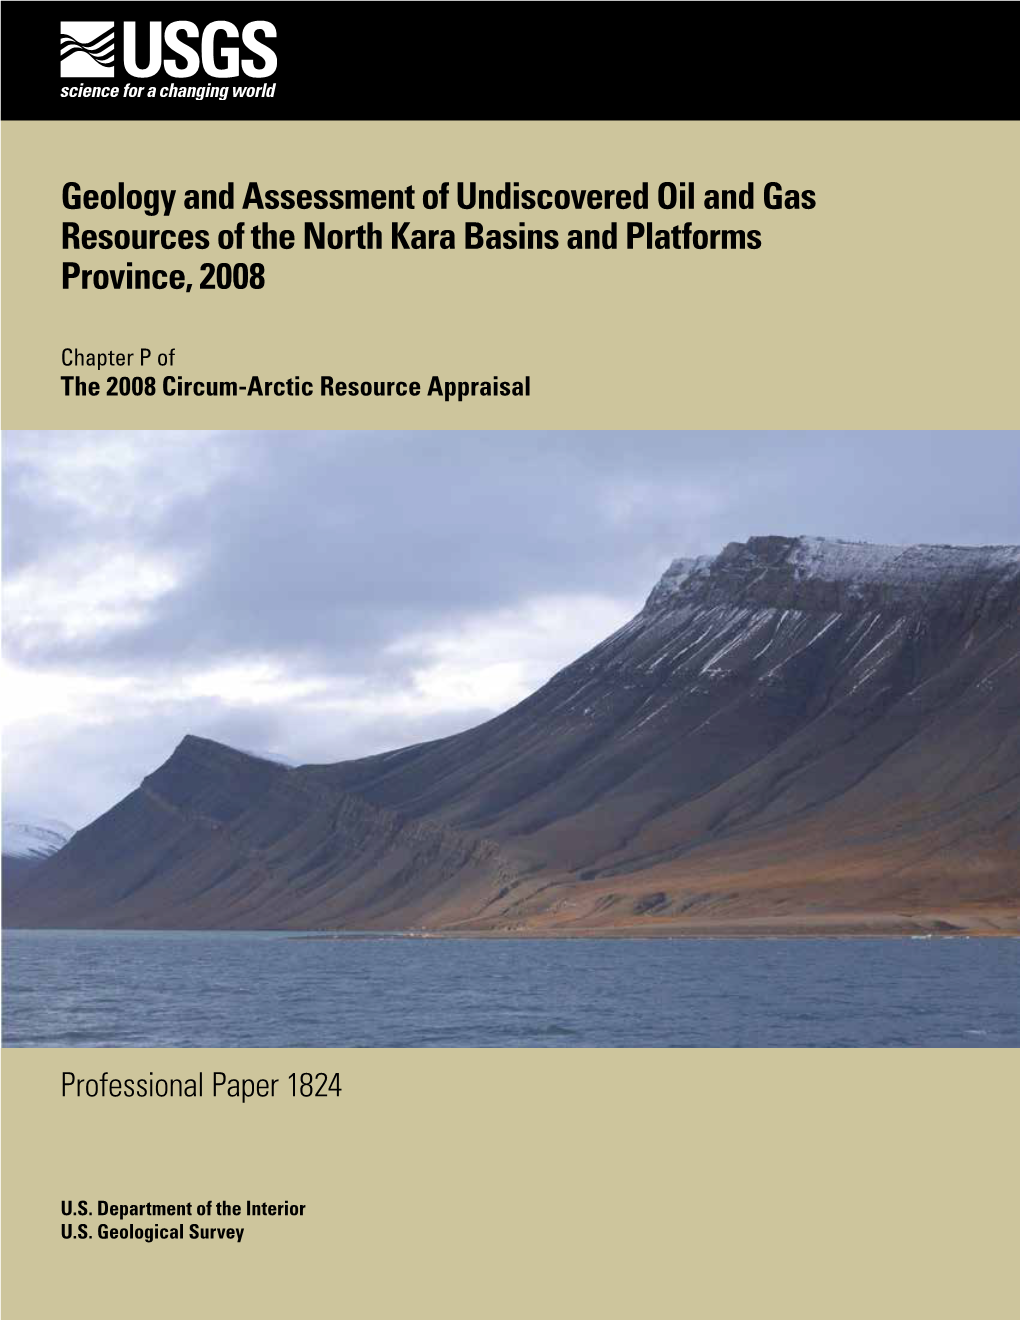 Geology and Assessment of Undiscovered Oil and Gas Resources of the North Kara Basins and Platforms Province, 2008